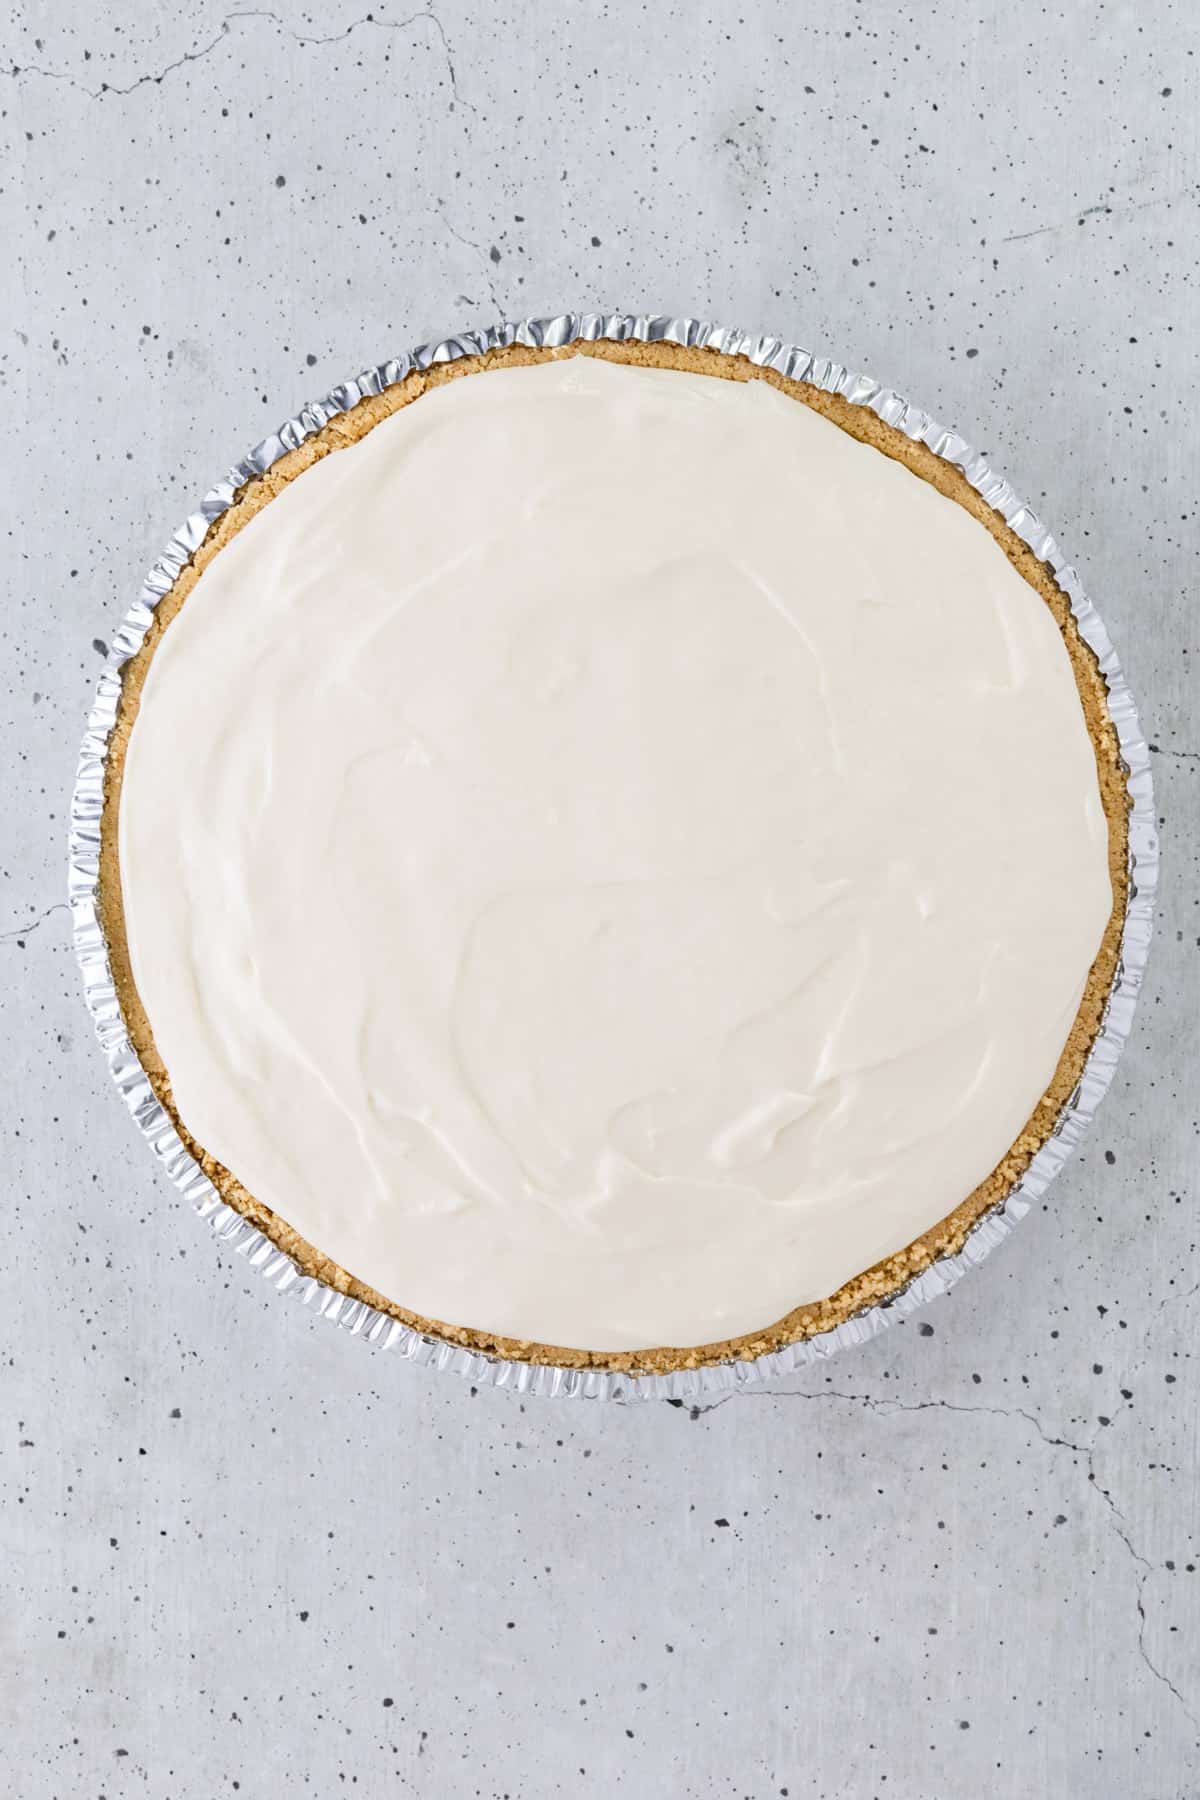 Cheesecake filling in a store-bought graham cracker crust.